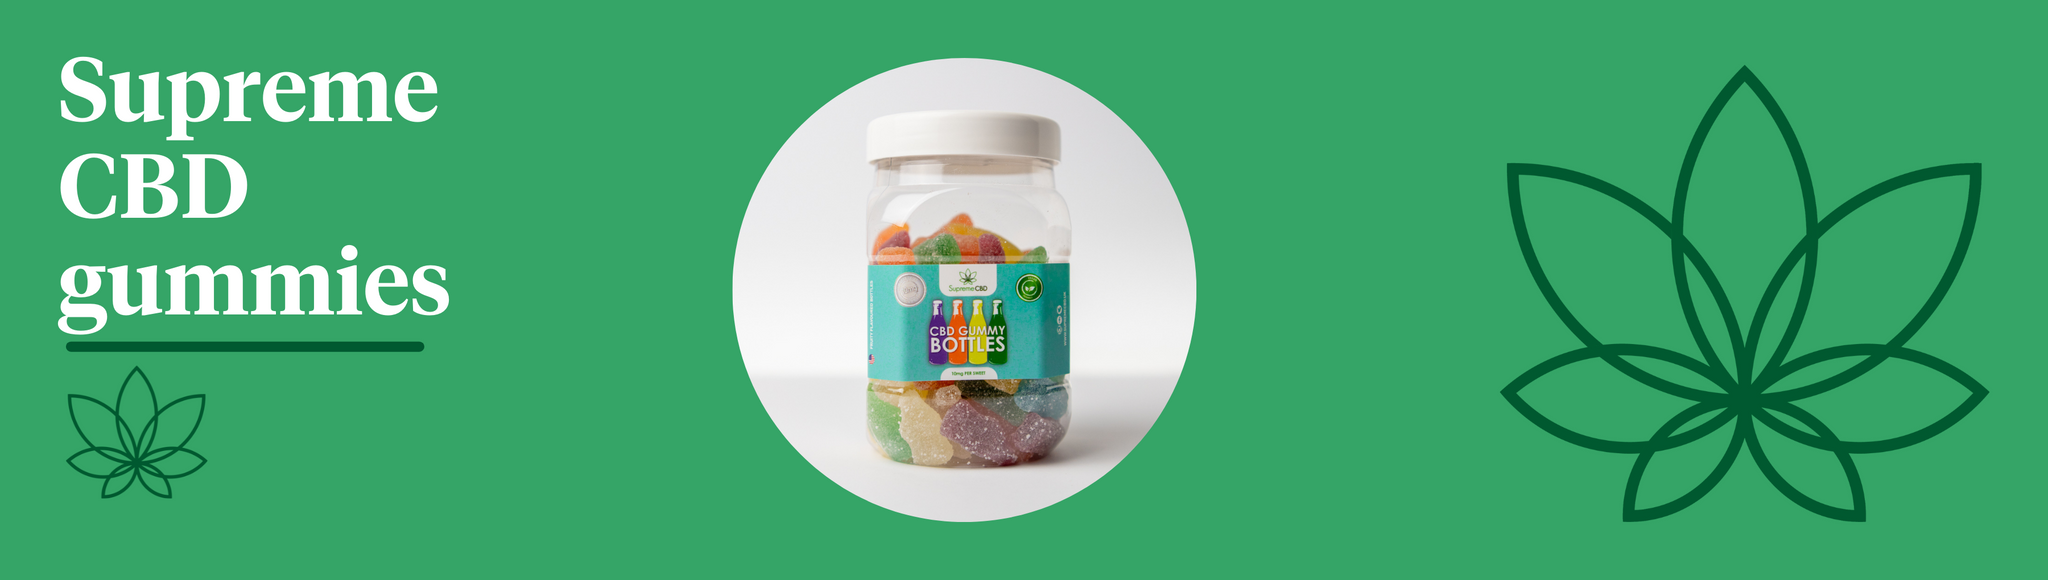 A green background with the Supreme CBD logo and a bottle of CBD gummies in the centre showing Supreme CBD gummies.